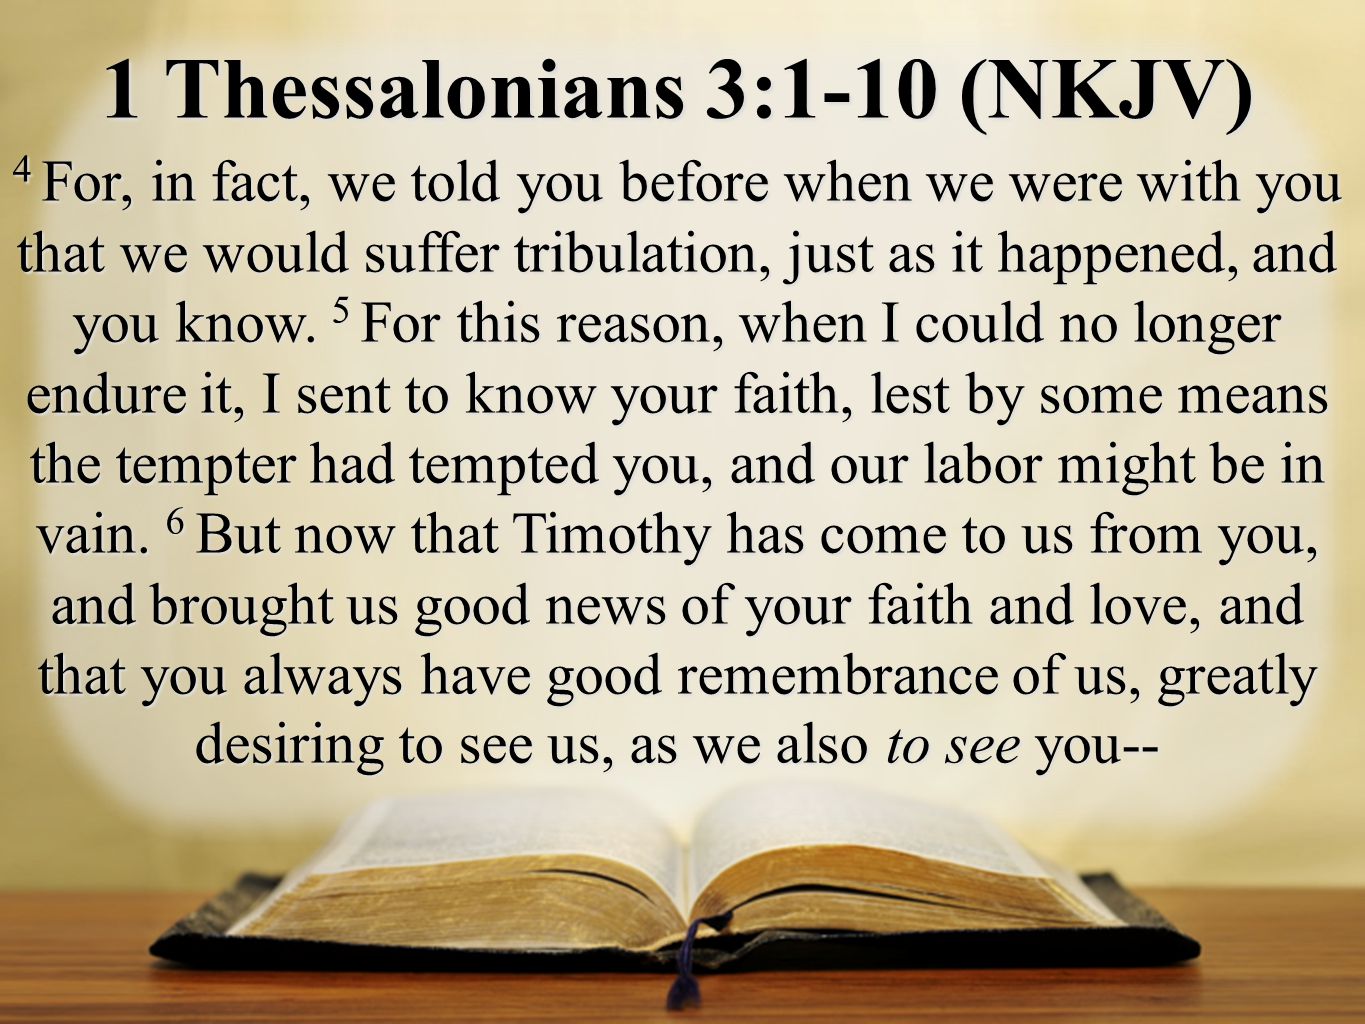 1 Thessalonians 3:1-10 (NKJV) 4 For, in fact, we told you before when we were with you that we would suffer tribulation, just as it happened, and you know.